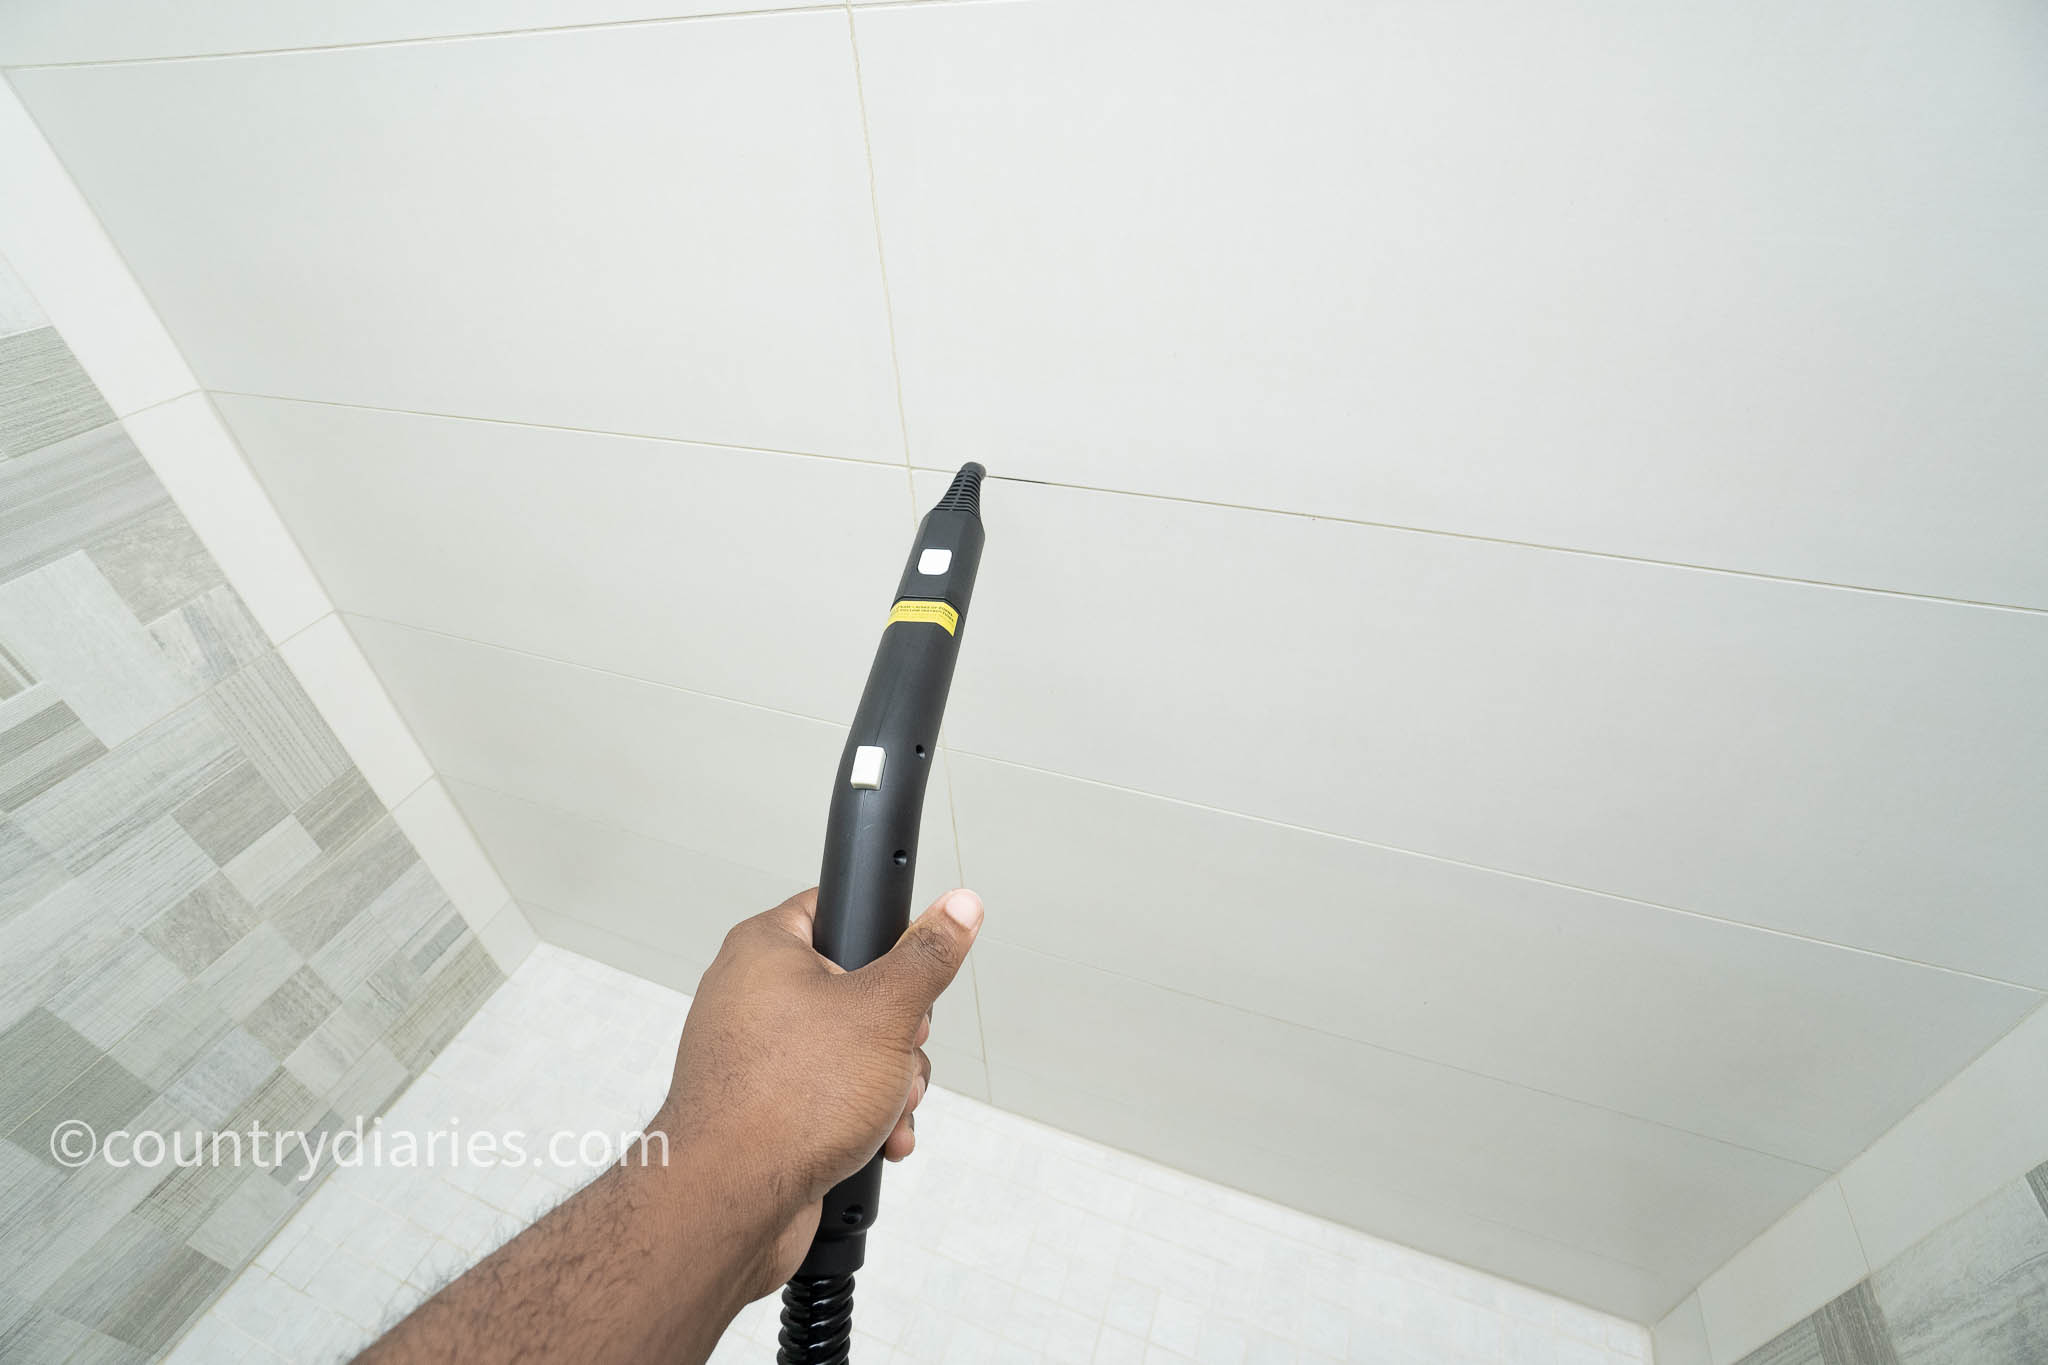 steaming grout joint to soften grout